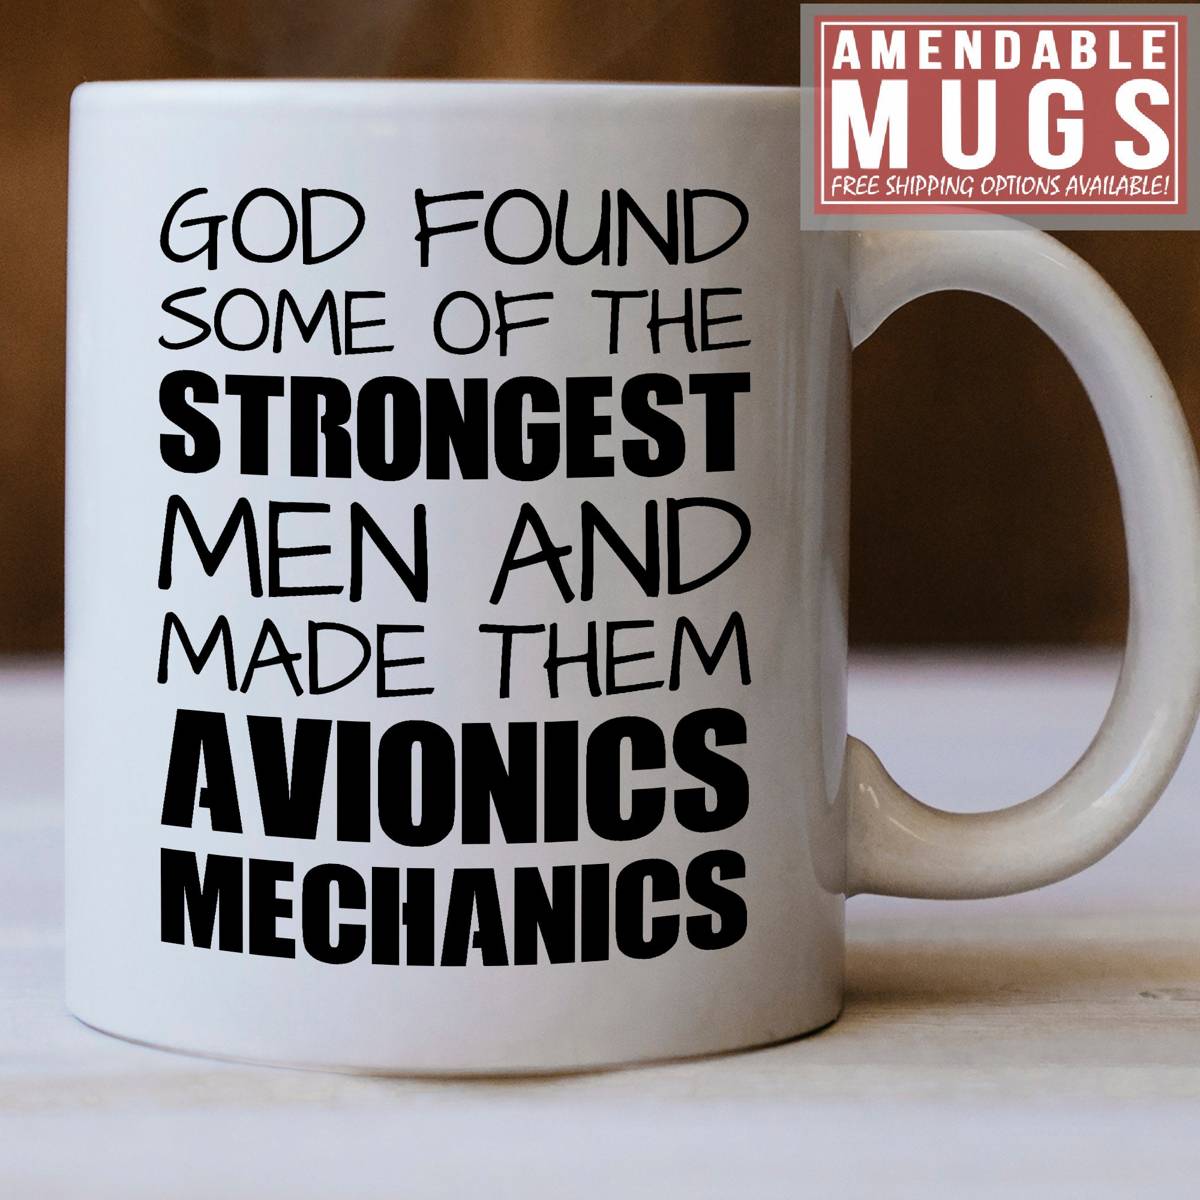 Avionics Mechanic - God Found Some Of The Strongest Men And Made Them ...